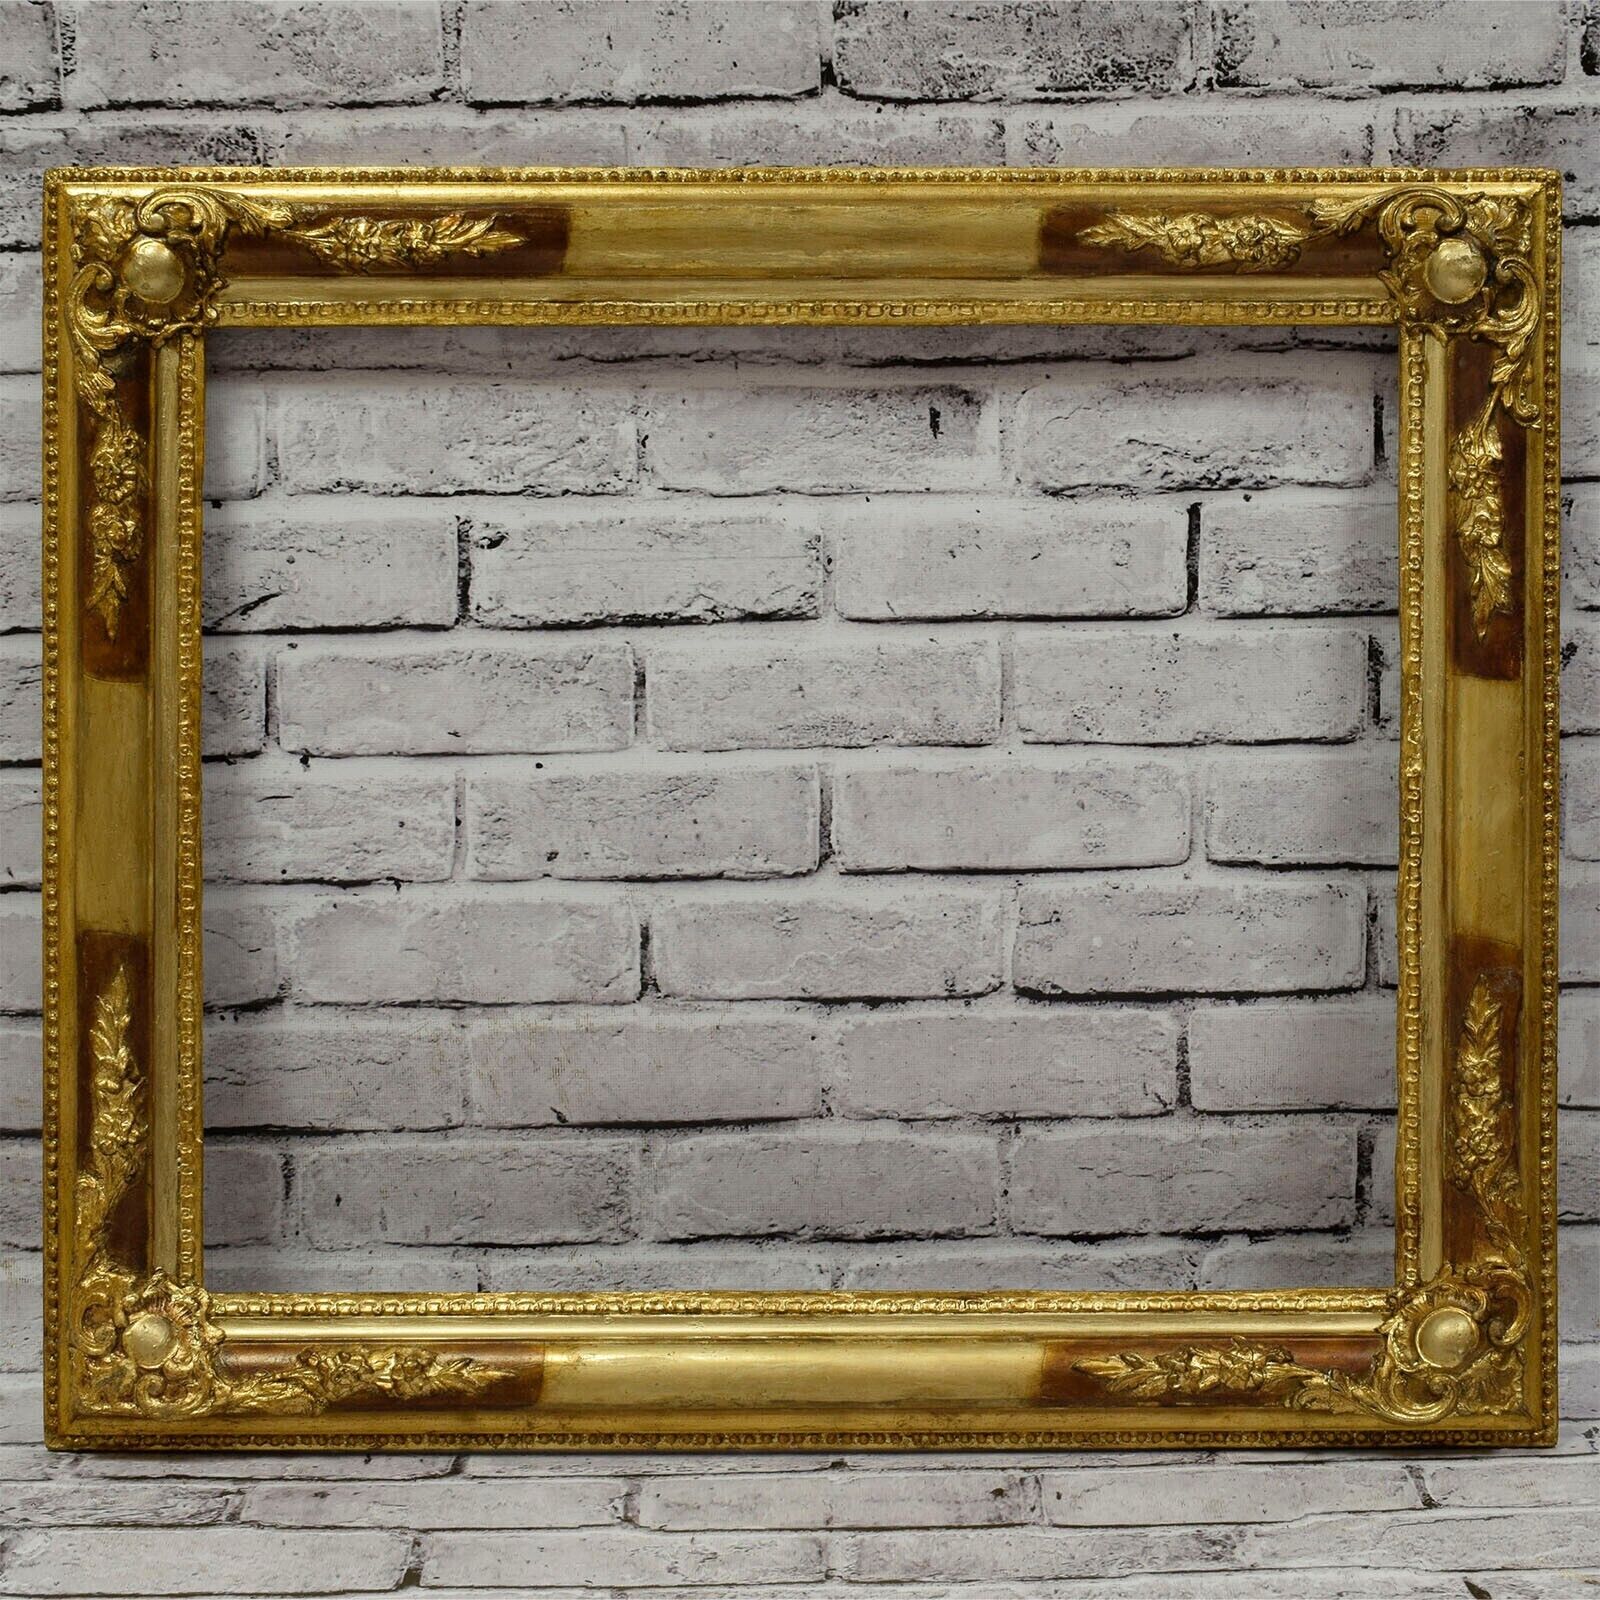 Ca. 1880-1900 Old Frame Original Condition with Leaf Metal 23.4 x 19.5 in